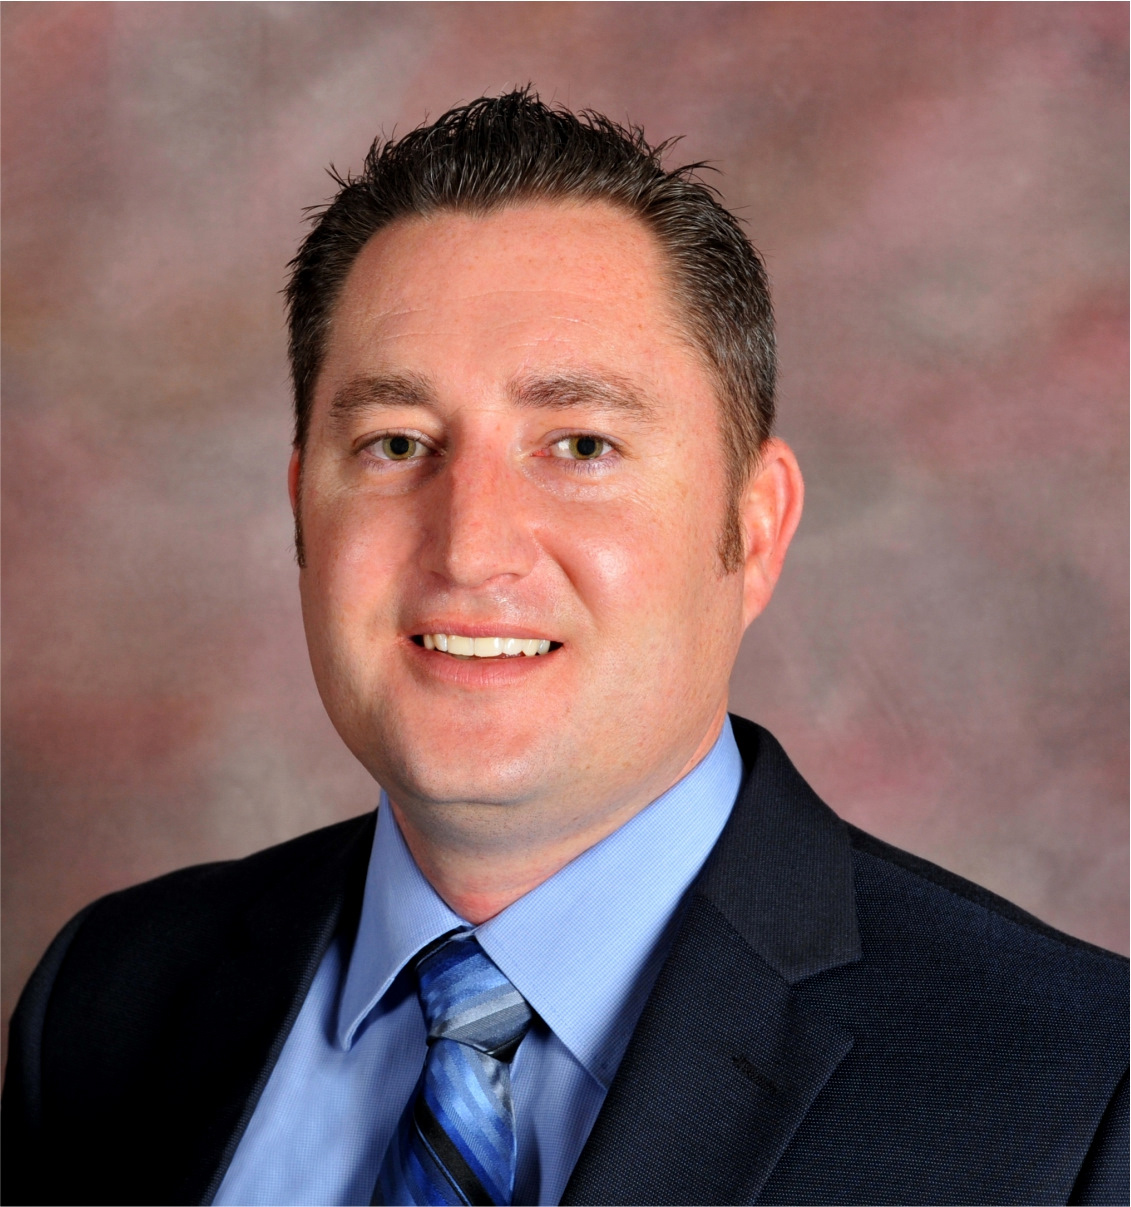 Samuel C. Collup has been named Director of Sales for Gainco, Inc.  Prior to his appointment, Collup was a Regional Manager at Bettcher Industries, Inc.